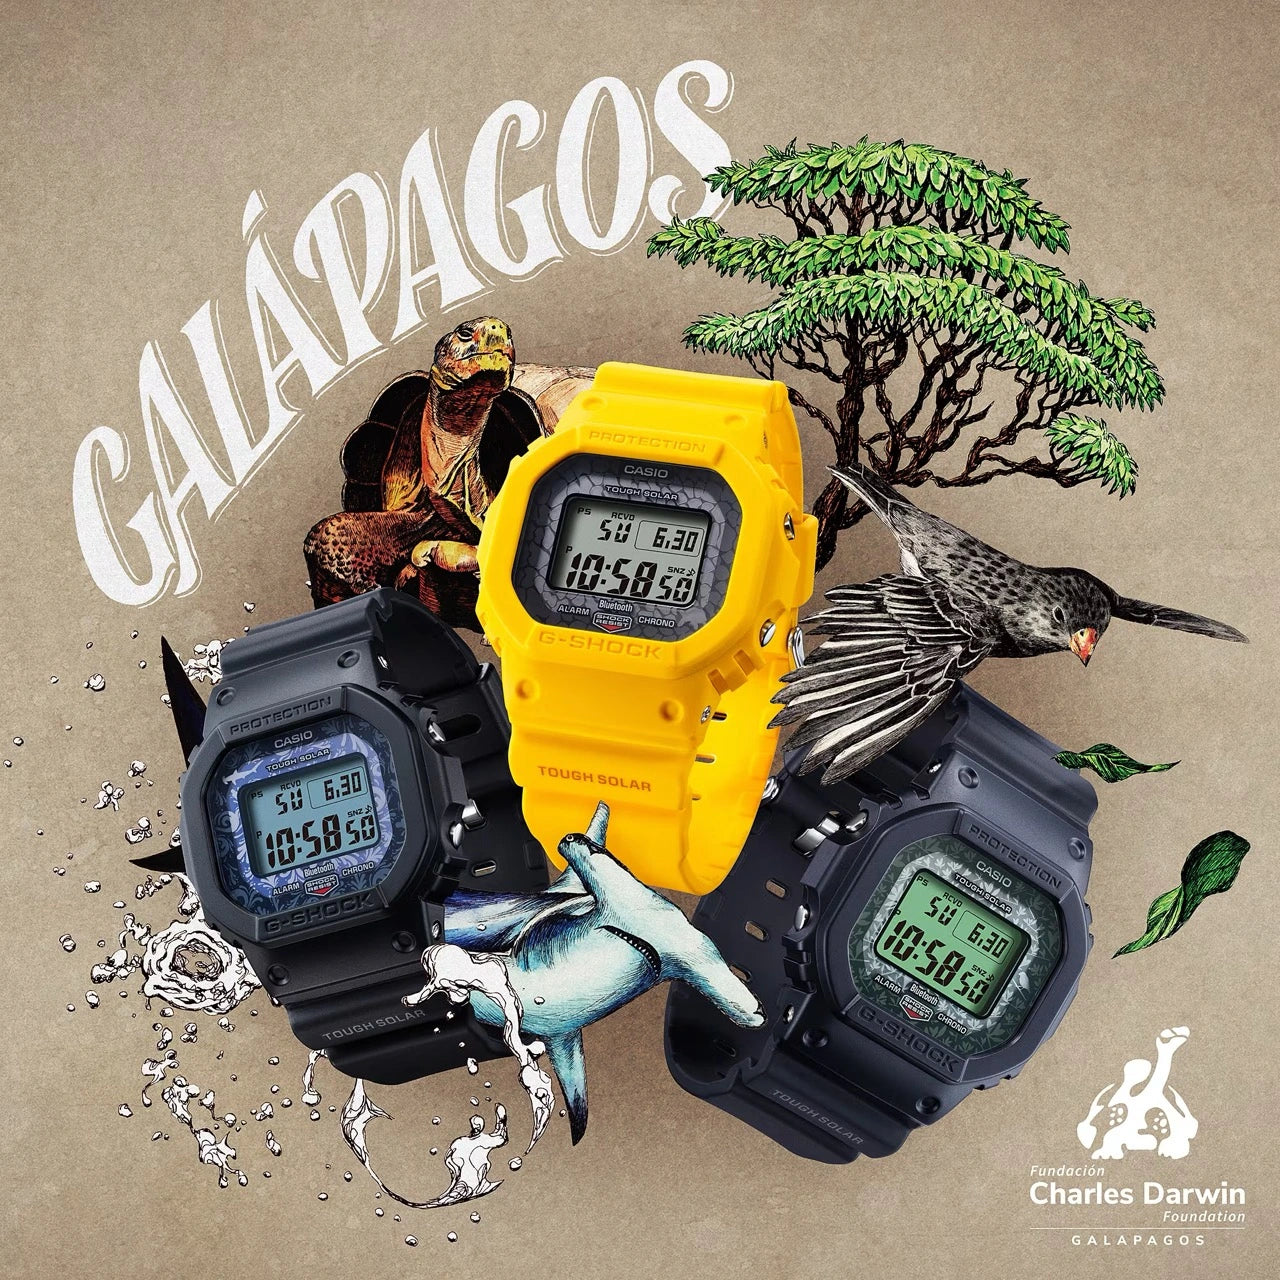 Digital image of yellow, navy, and black G-Shock x Charles Darwin Foundation watches with giant tortoises, hammerhead sharks, and Darwin's finches drawn in the background.